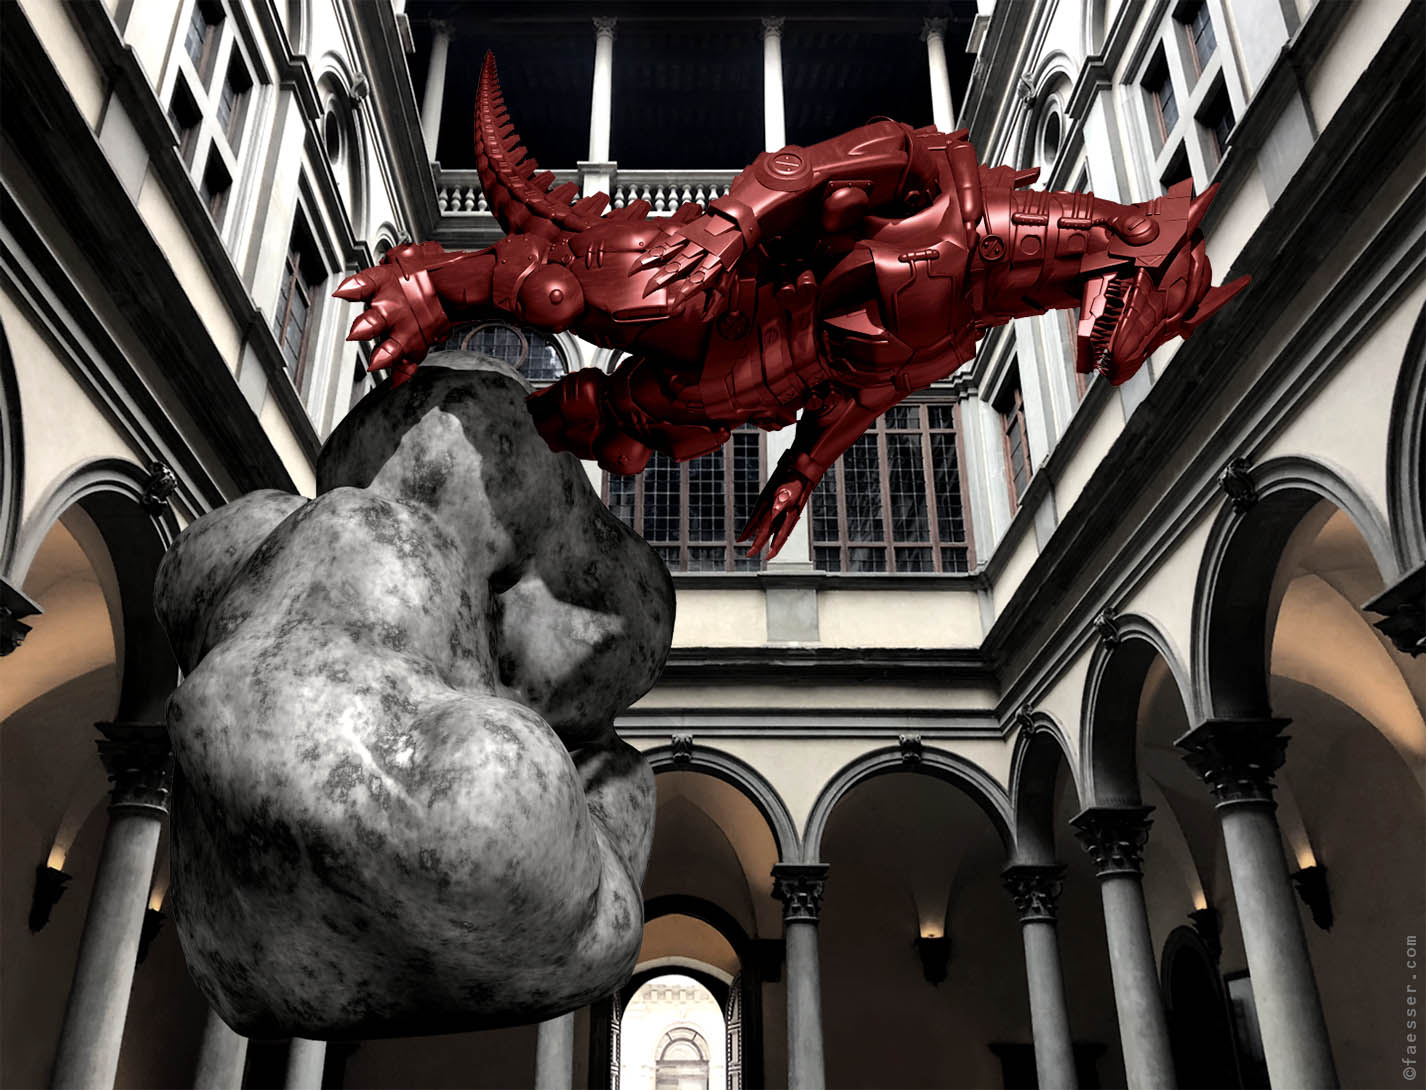 Godzilla Monster dancing exuberantly in the Palazzo Strozzi in Florence; work of art as public sculpture; artist Roland Faesser, sculptor and painter 2022